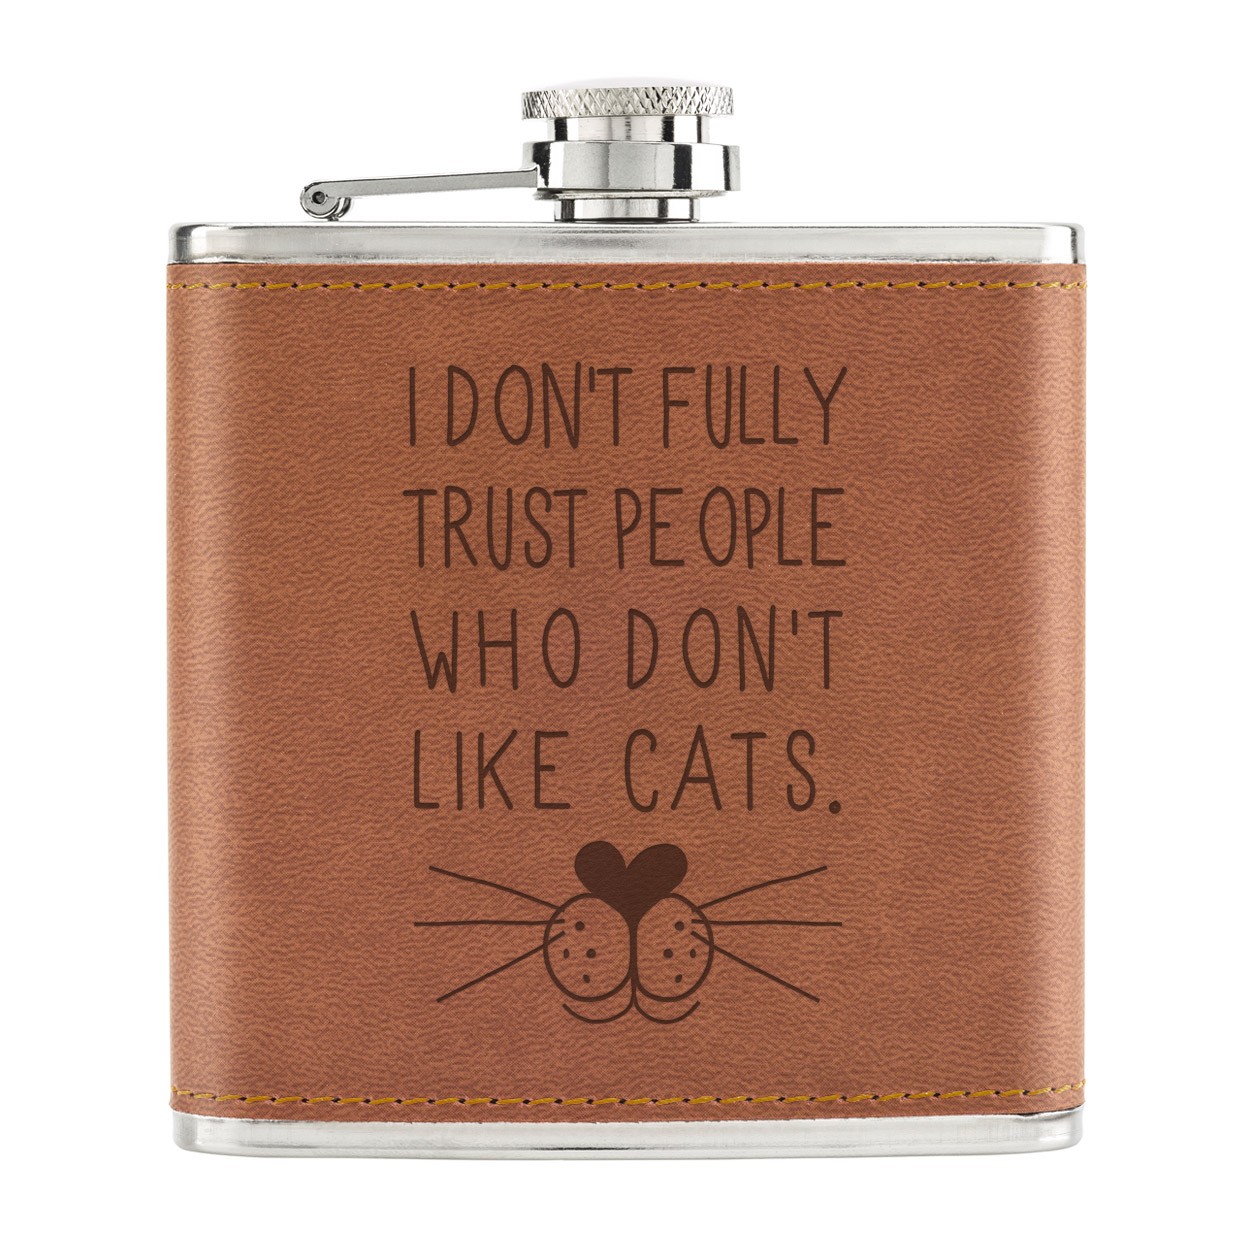 I Don't Fully Trust People Who Don't Like Cats 6oz PU Leather Hip Flask Tan